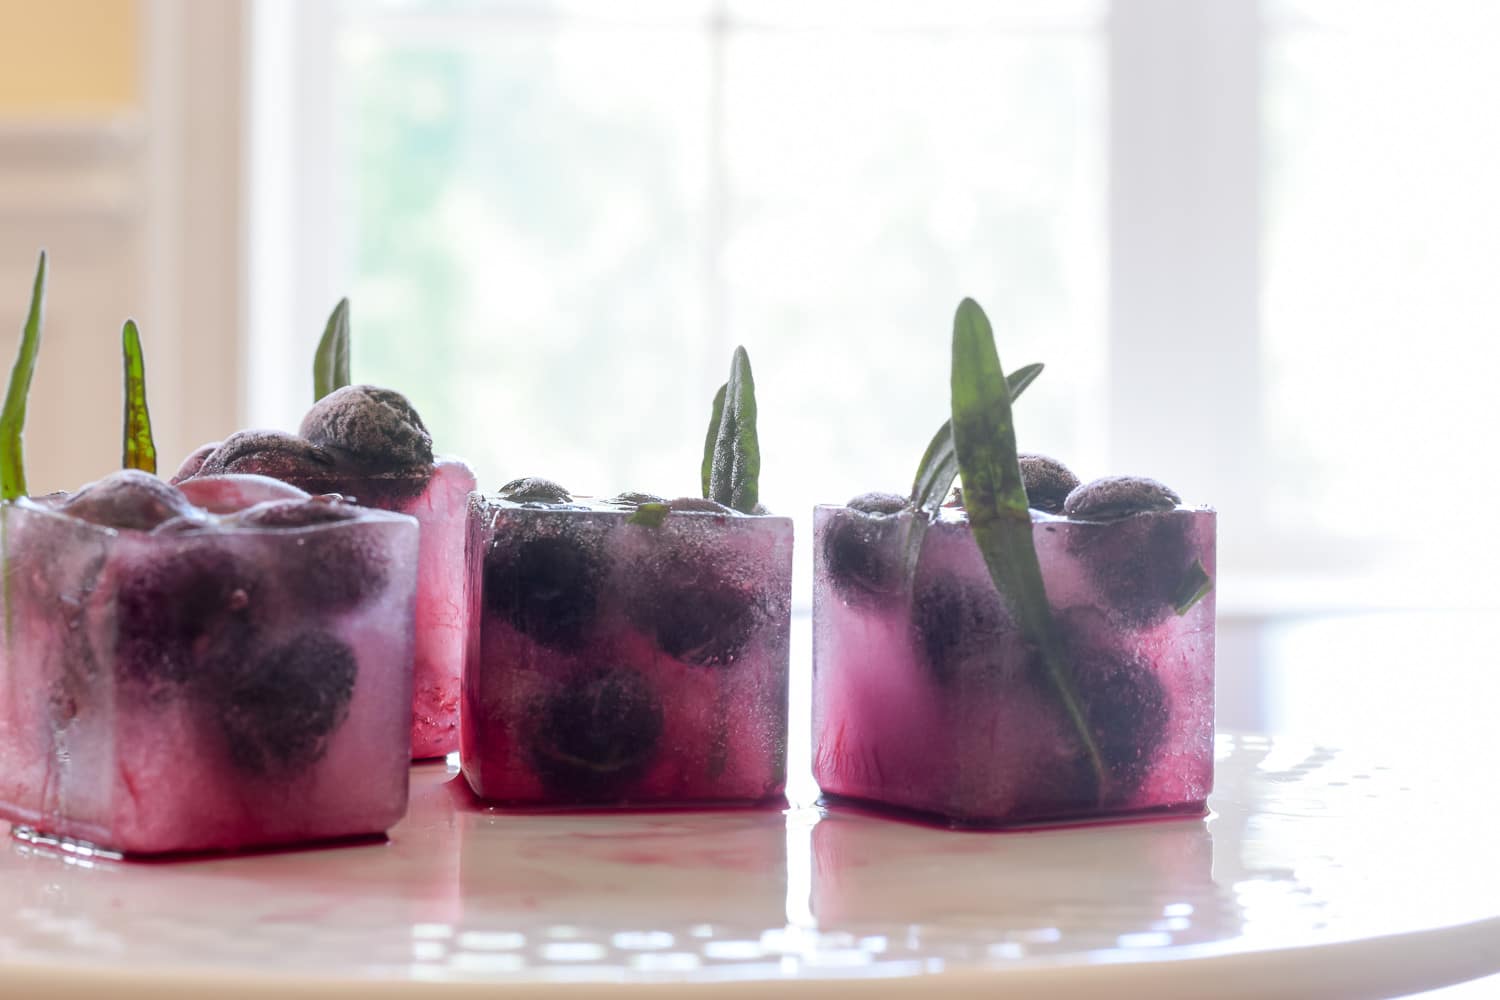 Fruit Ice Cubes are the perfect way to add flavor to your water or favorite beverages this summer. Cucumber/Mint, Watermelon/Lime and Blueberry/Lavender are delicious combinations and make getting that daily water quota all the more enjoyable.